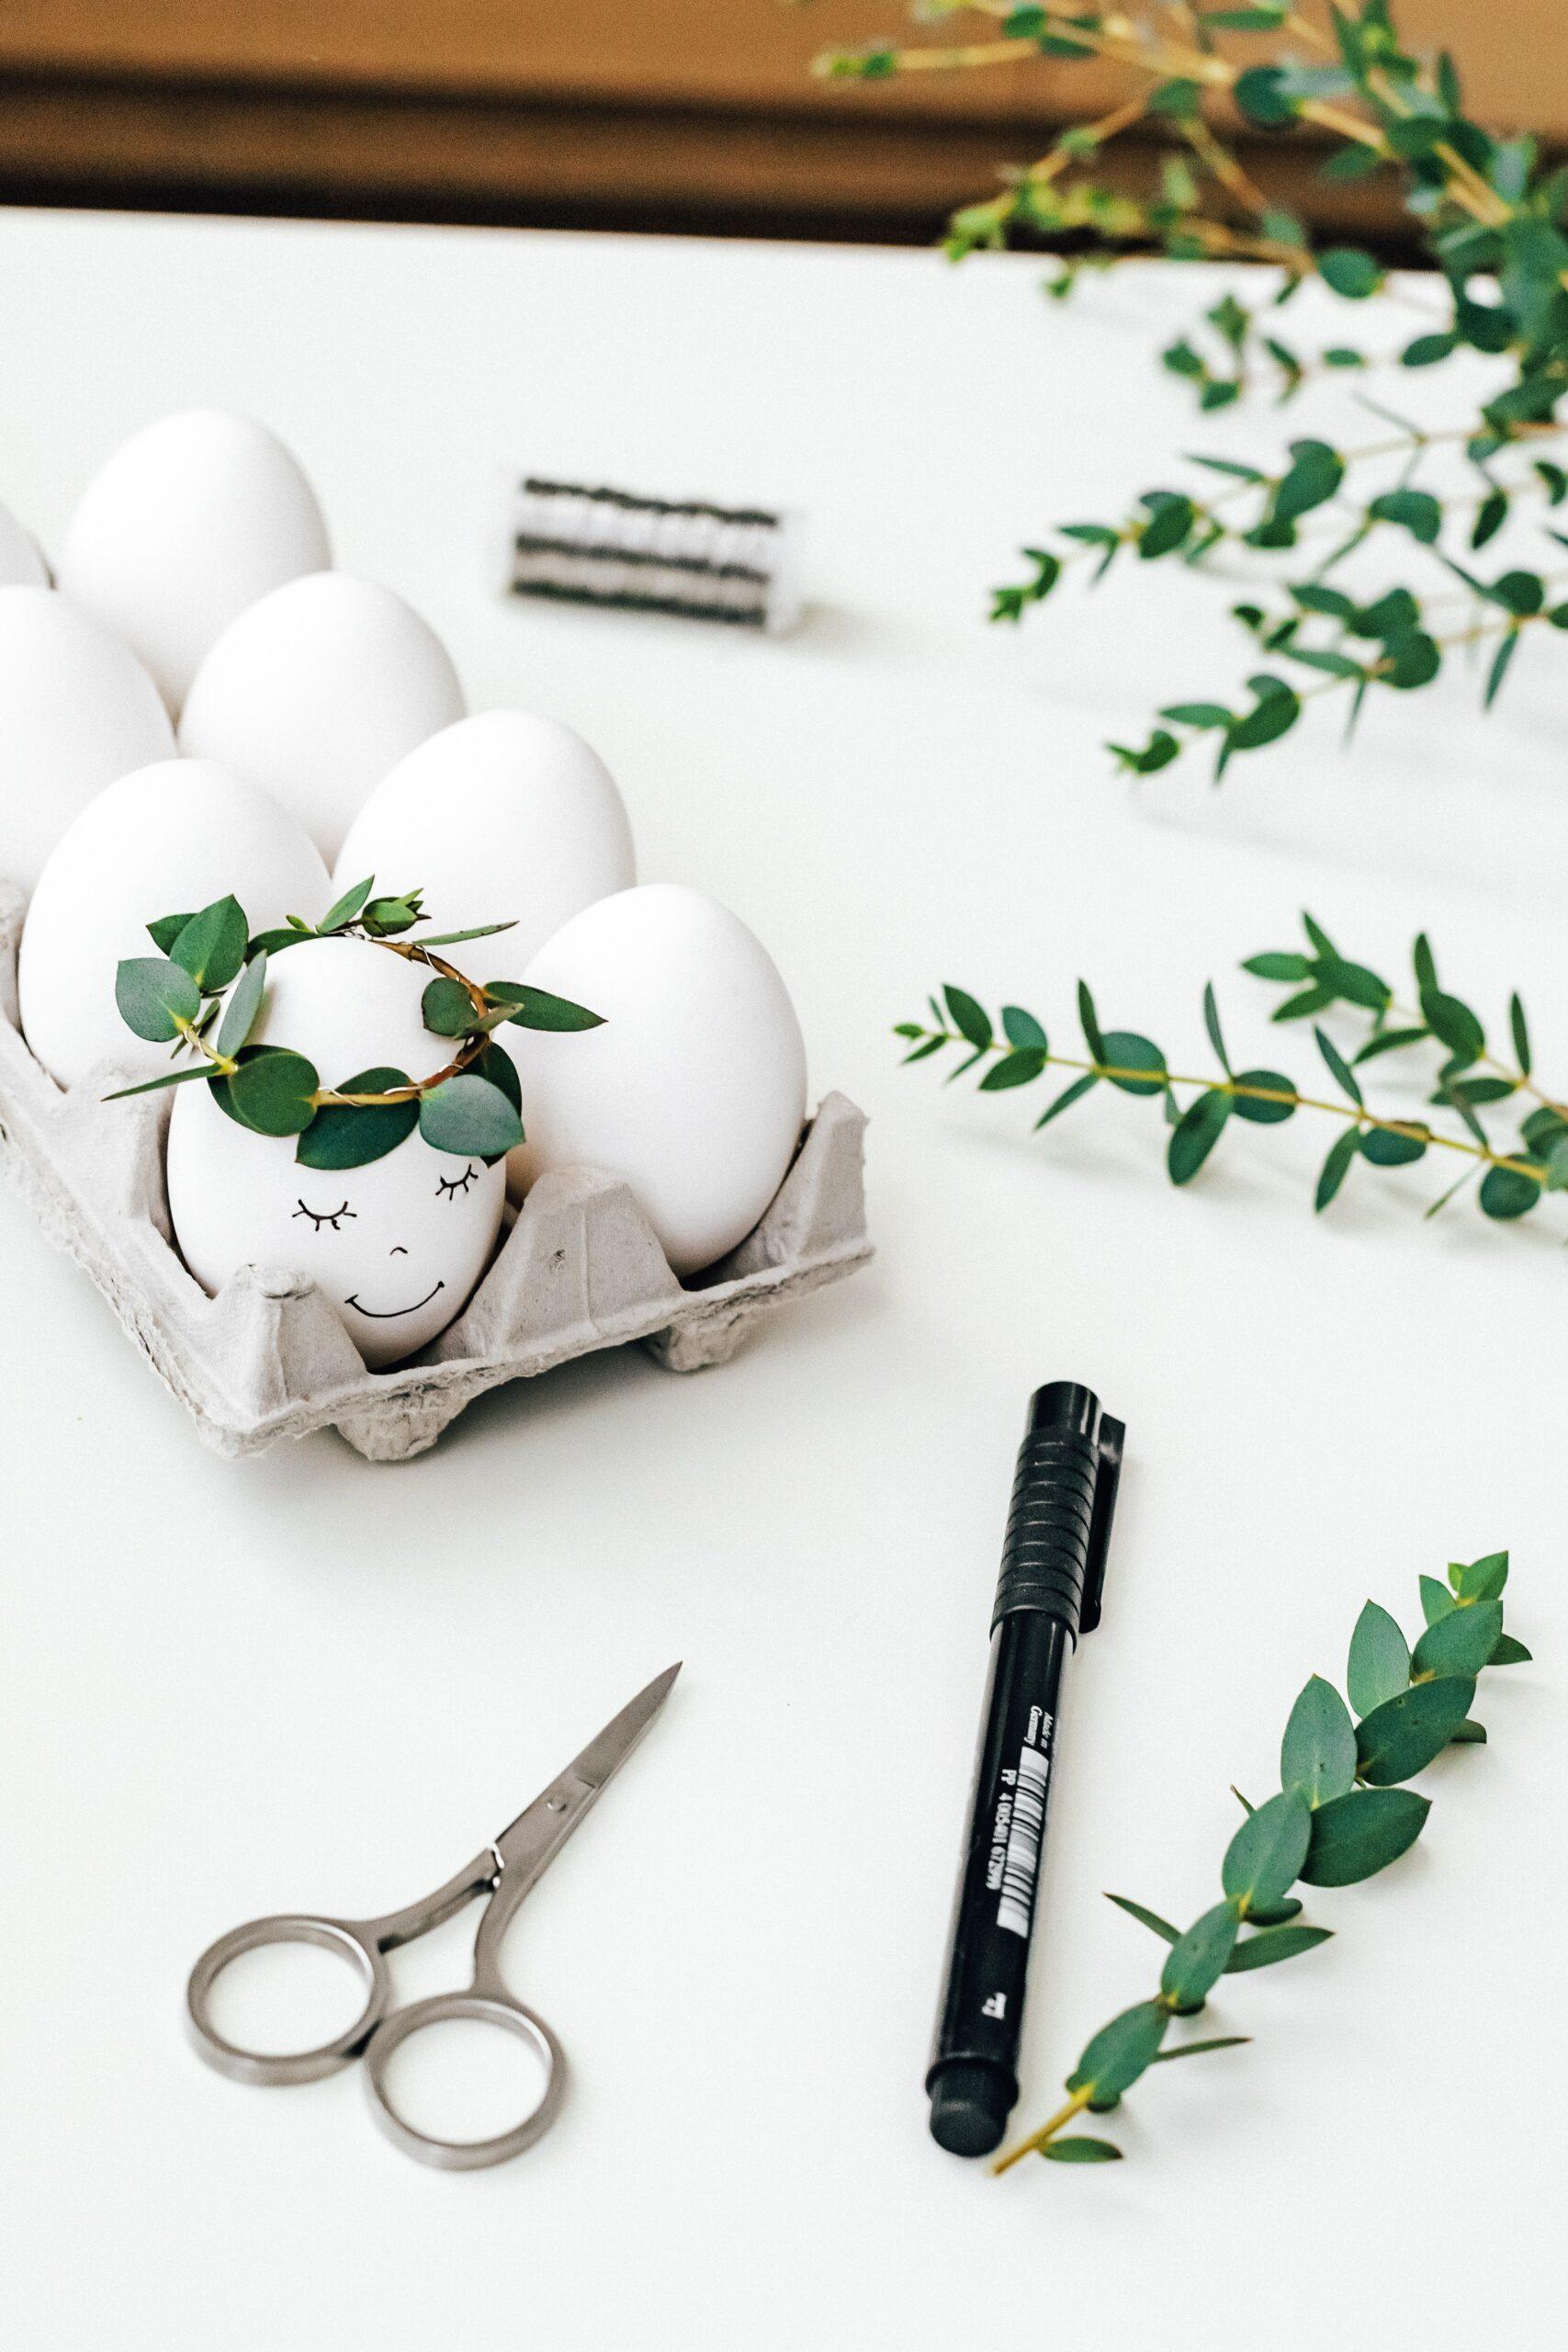 White eggs in a carton with one that has a drawn-on face with a black marker. The egg has a greenery crown